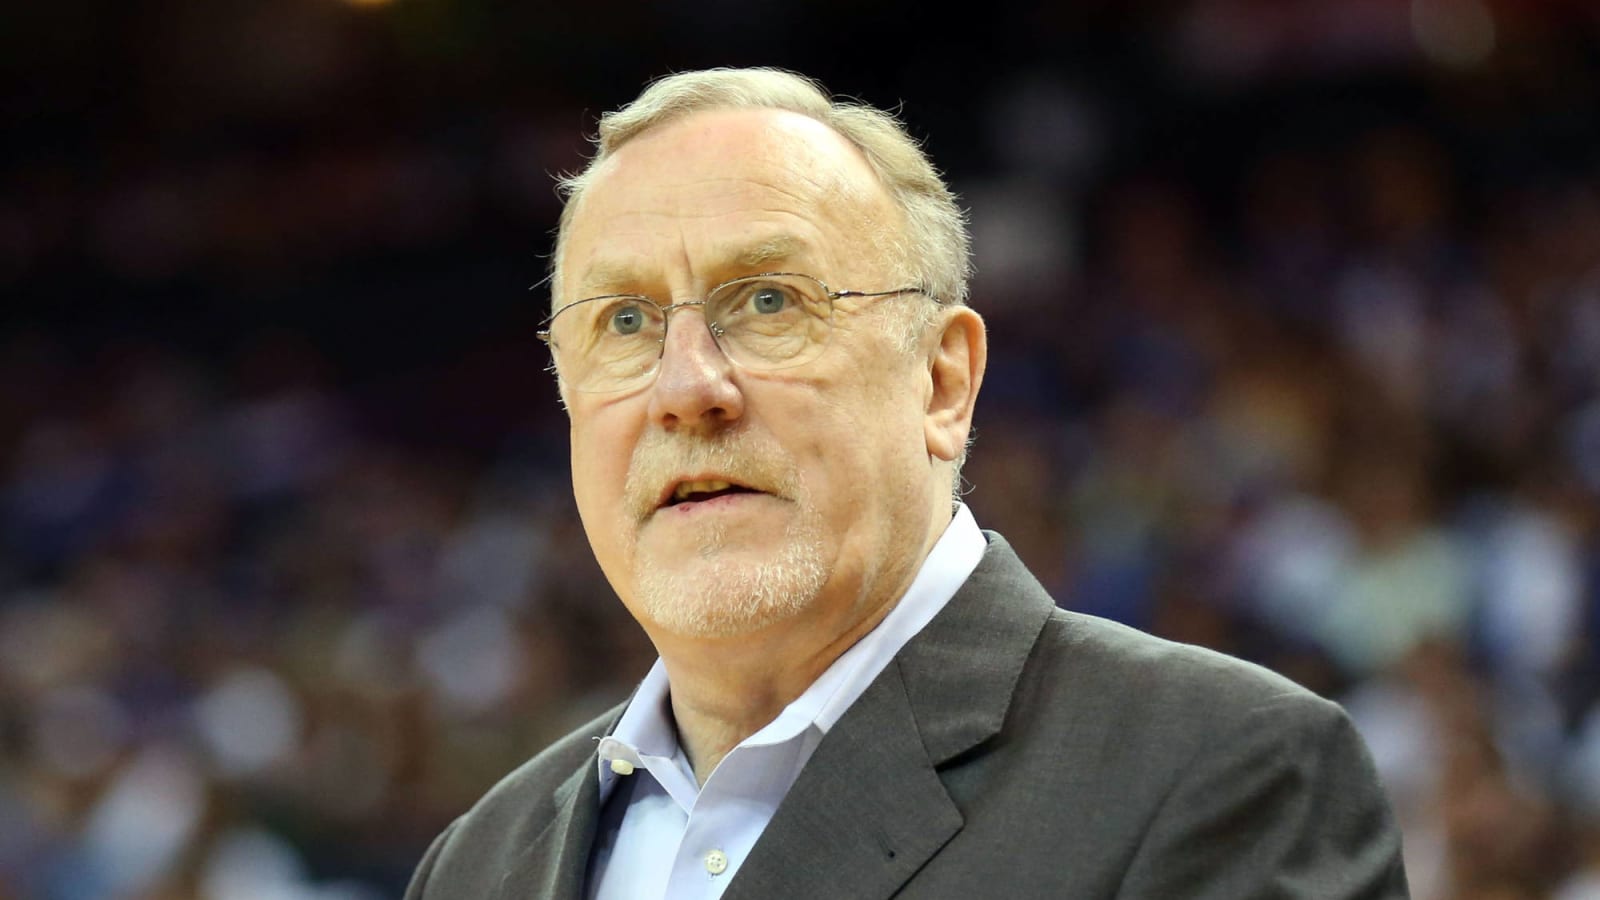 Son of Rick Adelman dies after being hit by car